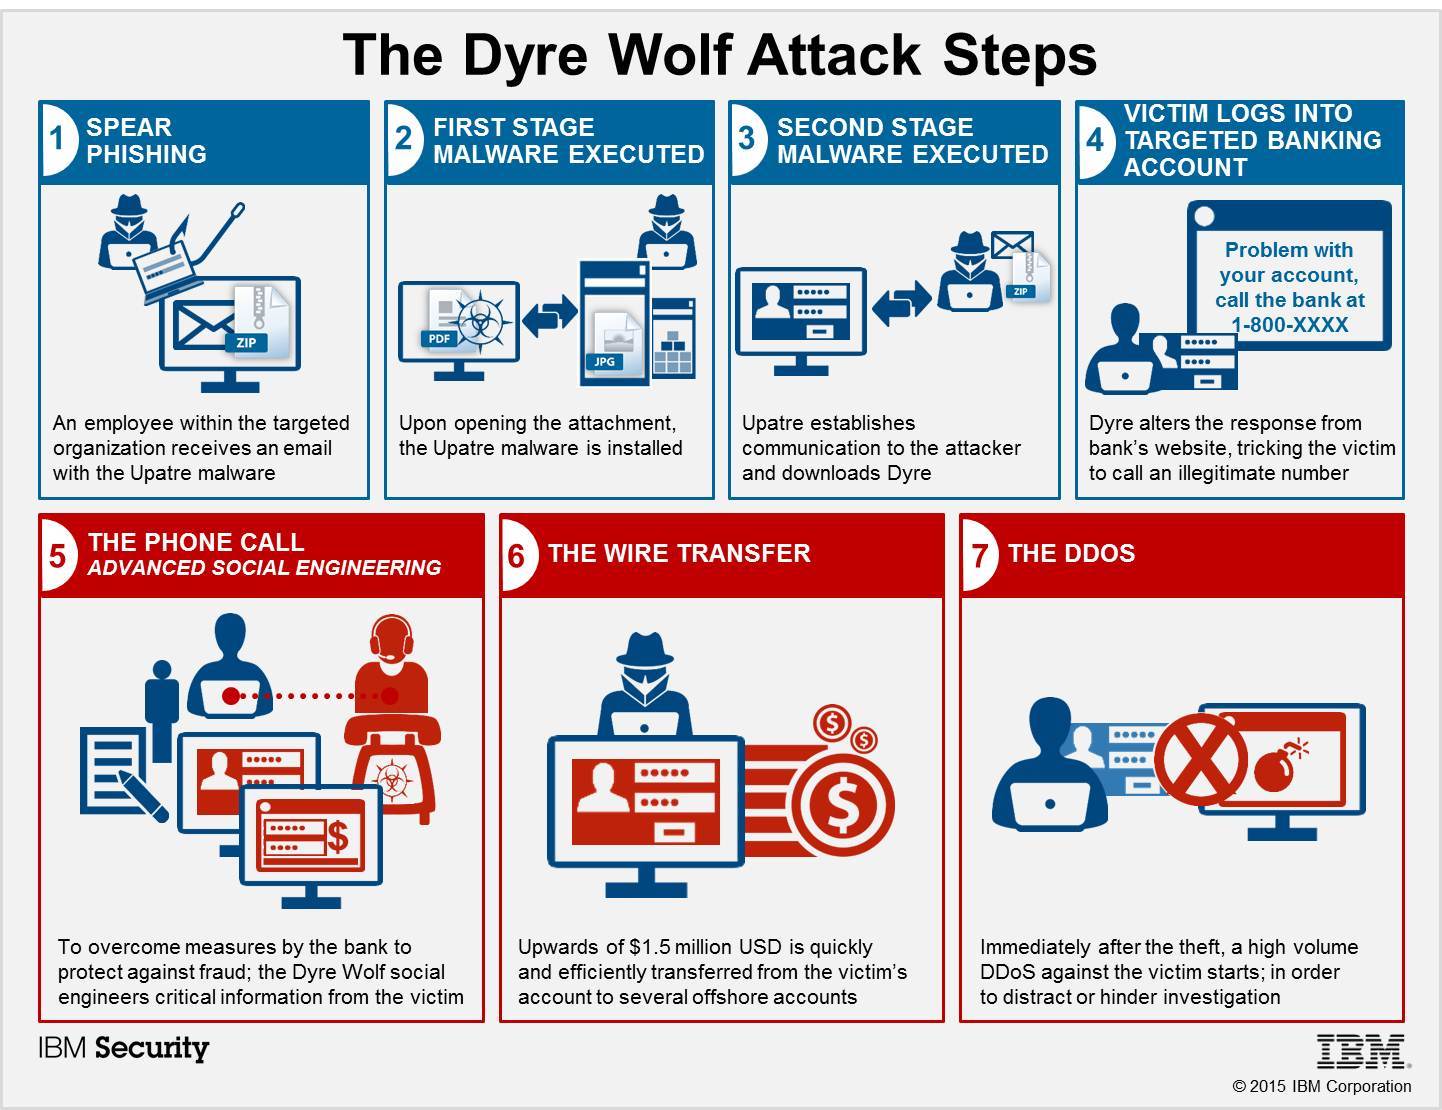 dyre-wolf-malware-bypasses-2-factor-authentication-security-steals-1million-2